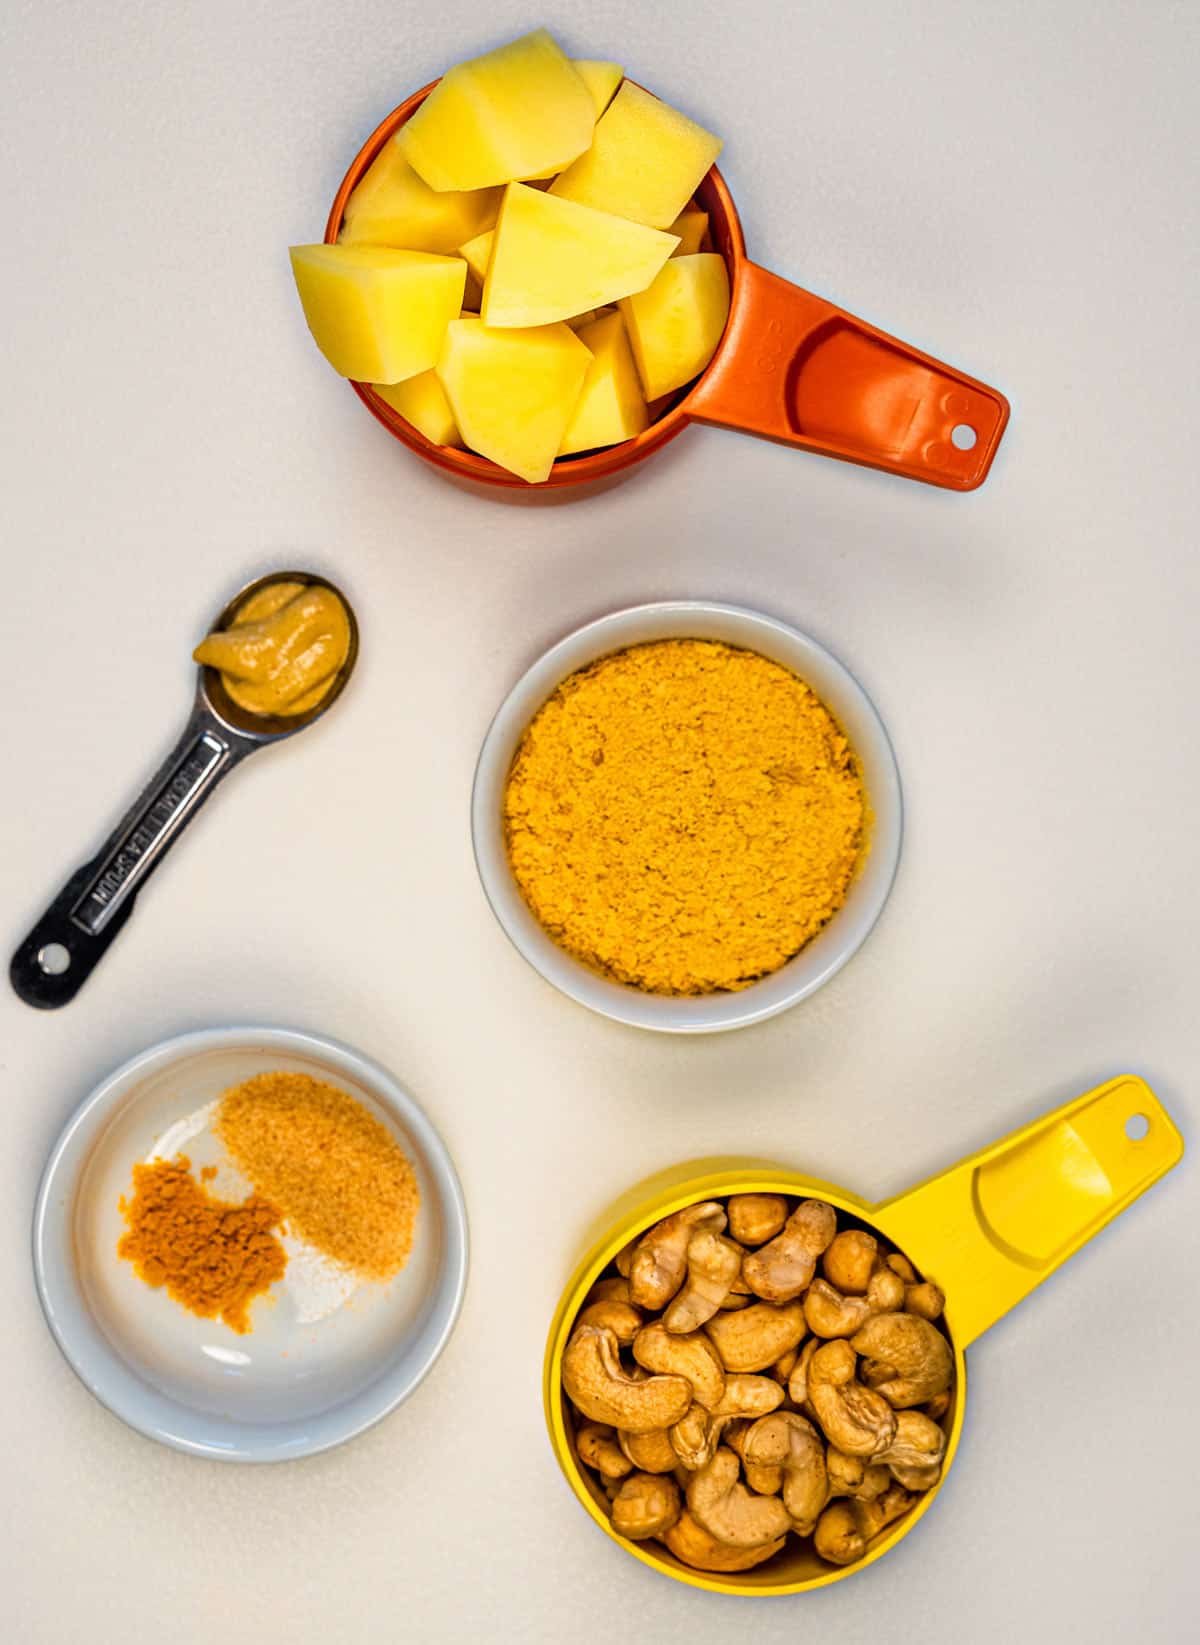 Orange measuring cup of cubed potatoes, yellow measuring cup of cashews, white bowl of nutritional yeast, measuring spoon of mustard, and white bowl of spices.